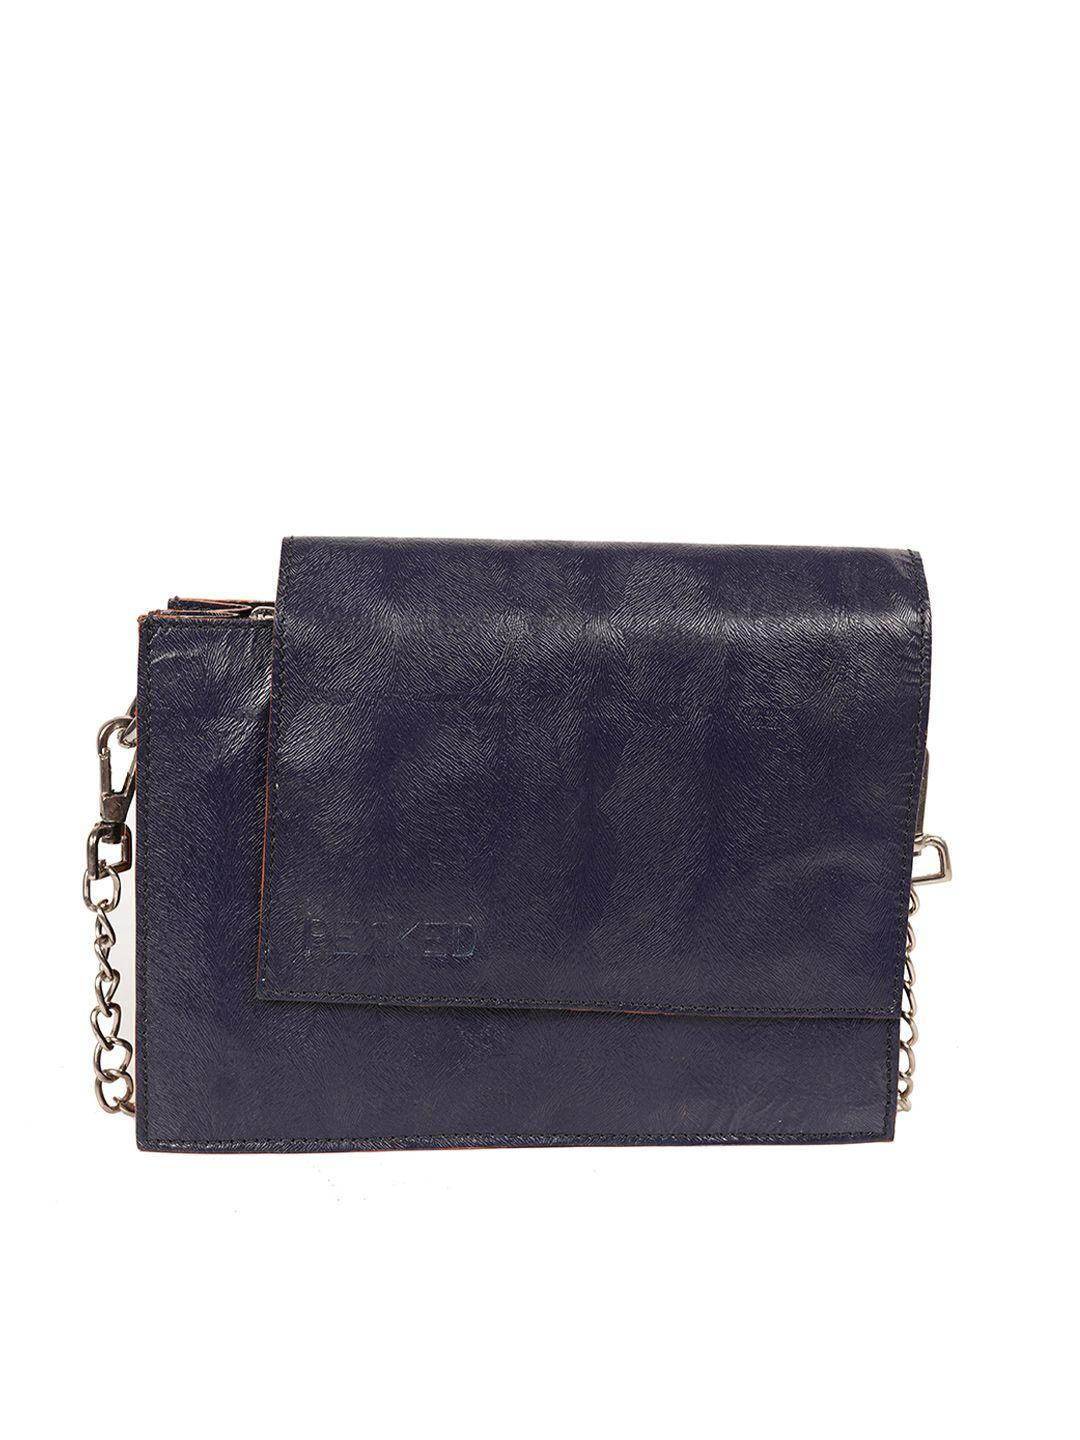 perked blue textured leather structured sling bag with quilted